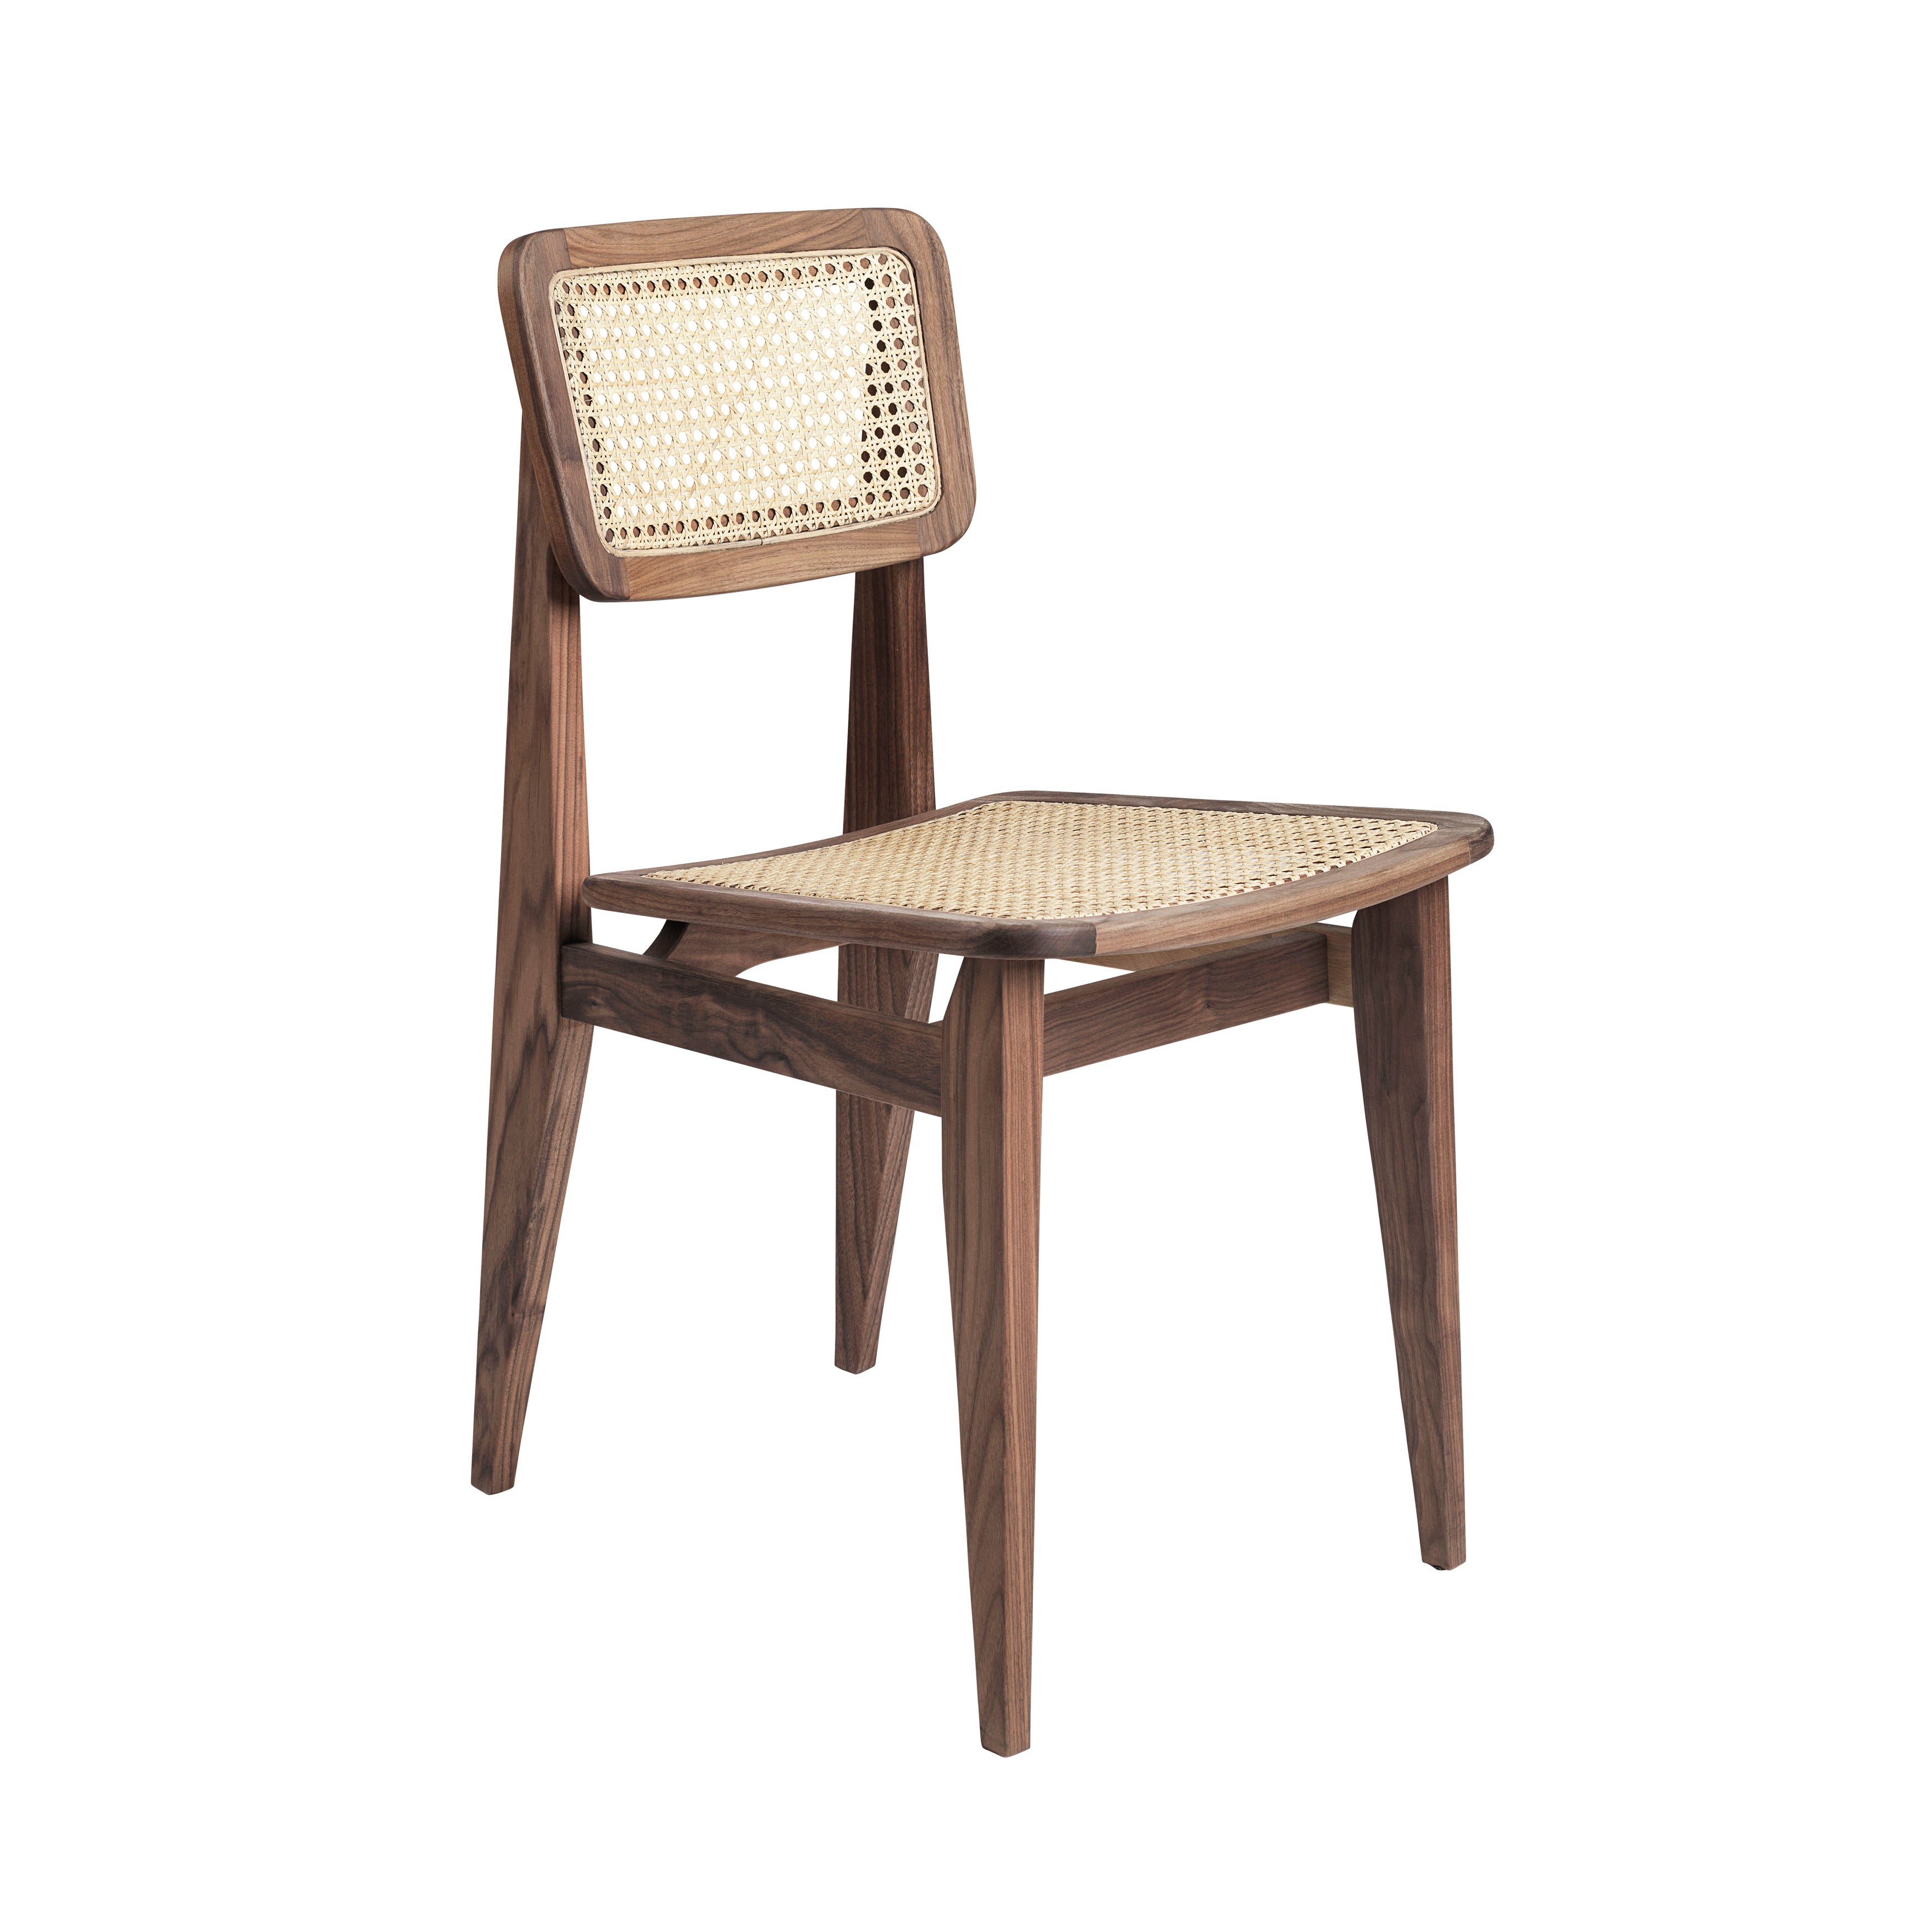 C-Chair Dining Chair: All French Cane + American Walnut 